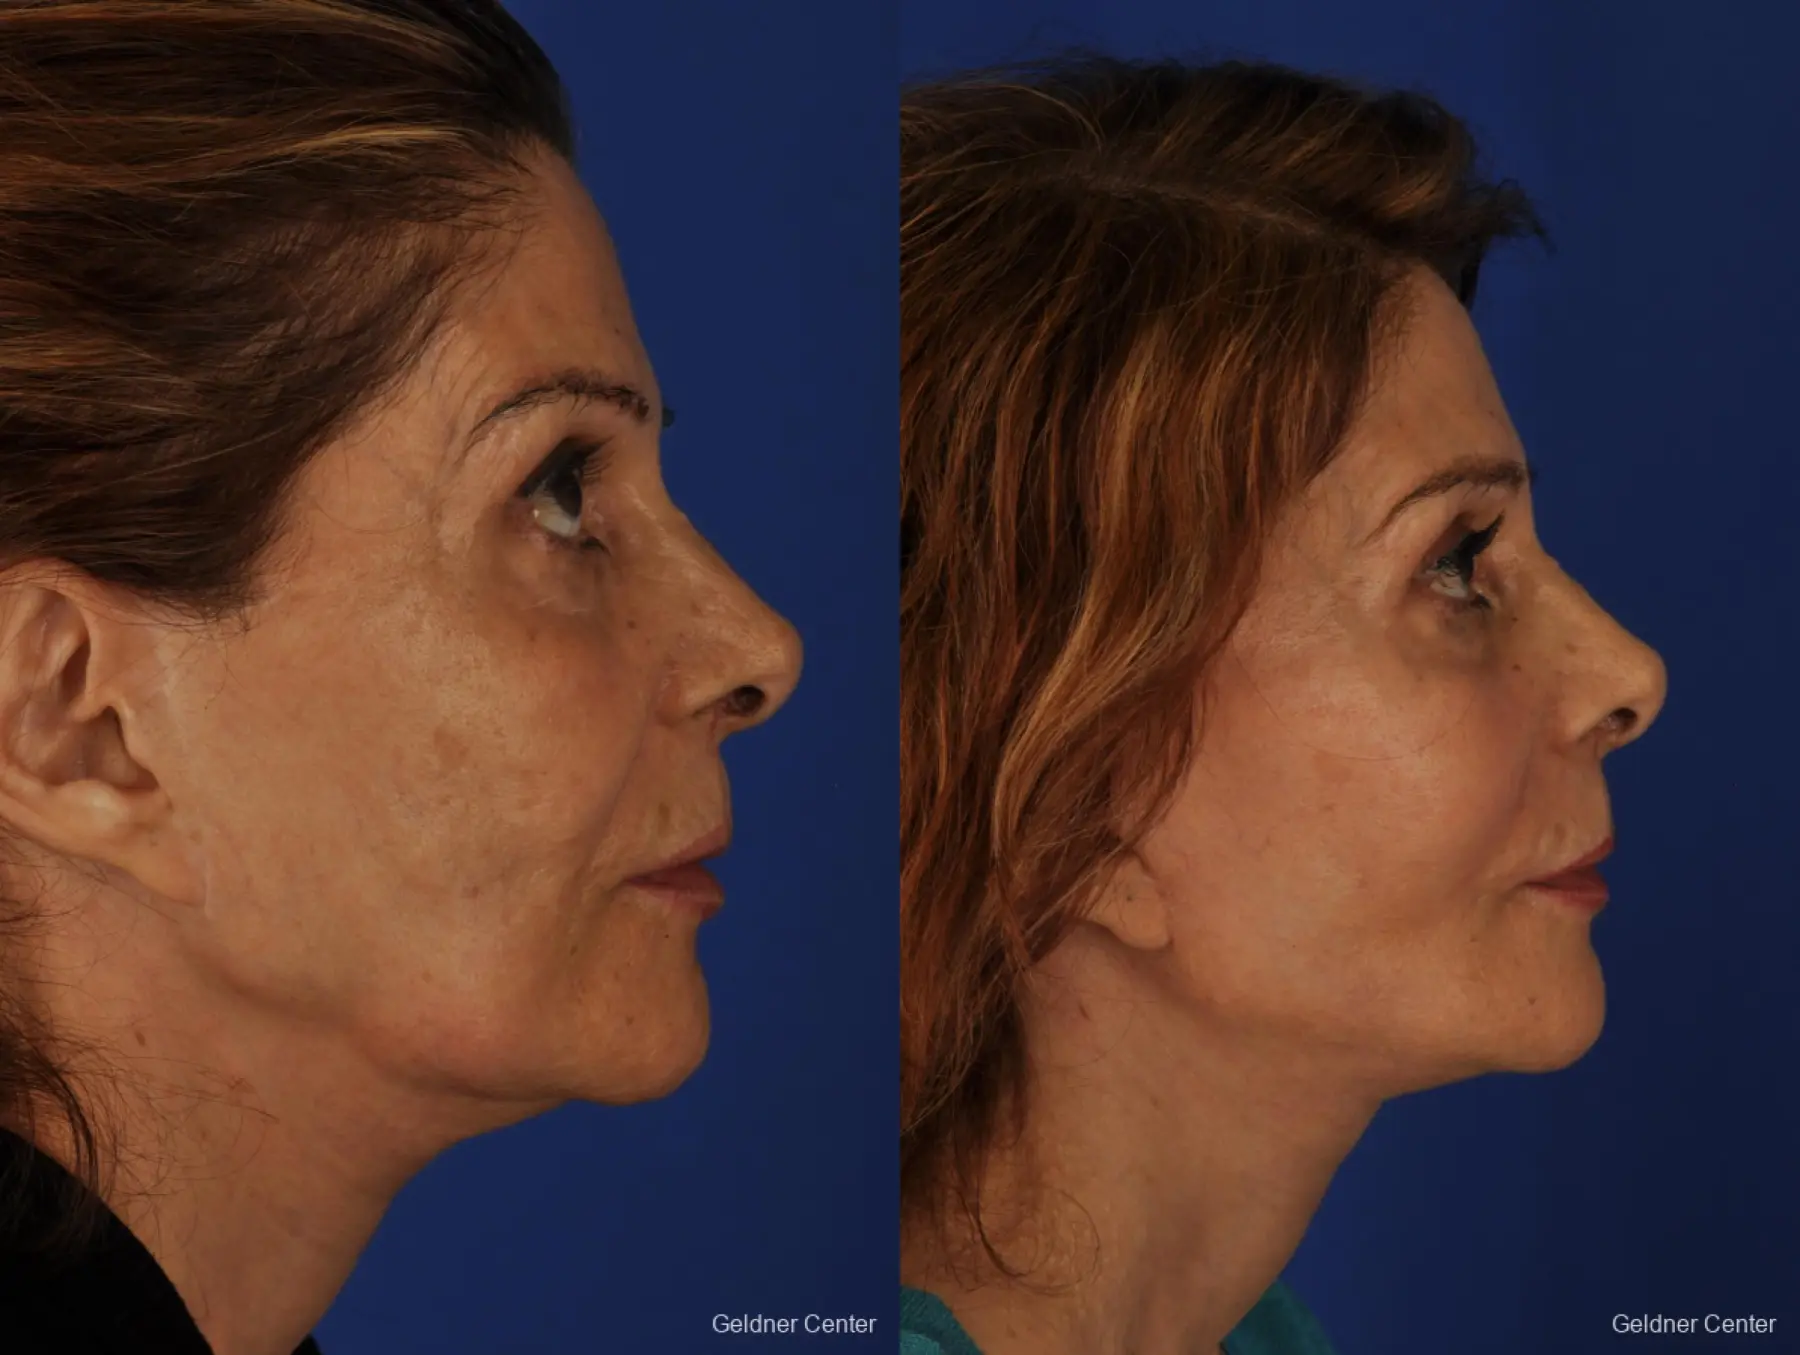 Facelift: Patient 3 - Before and After 2